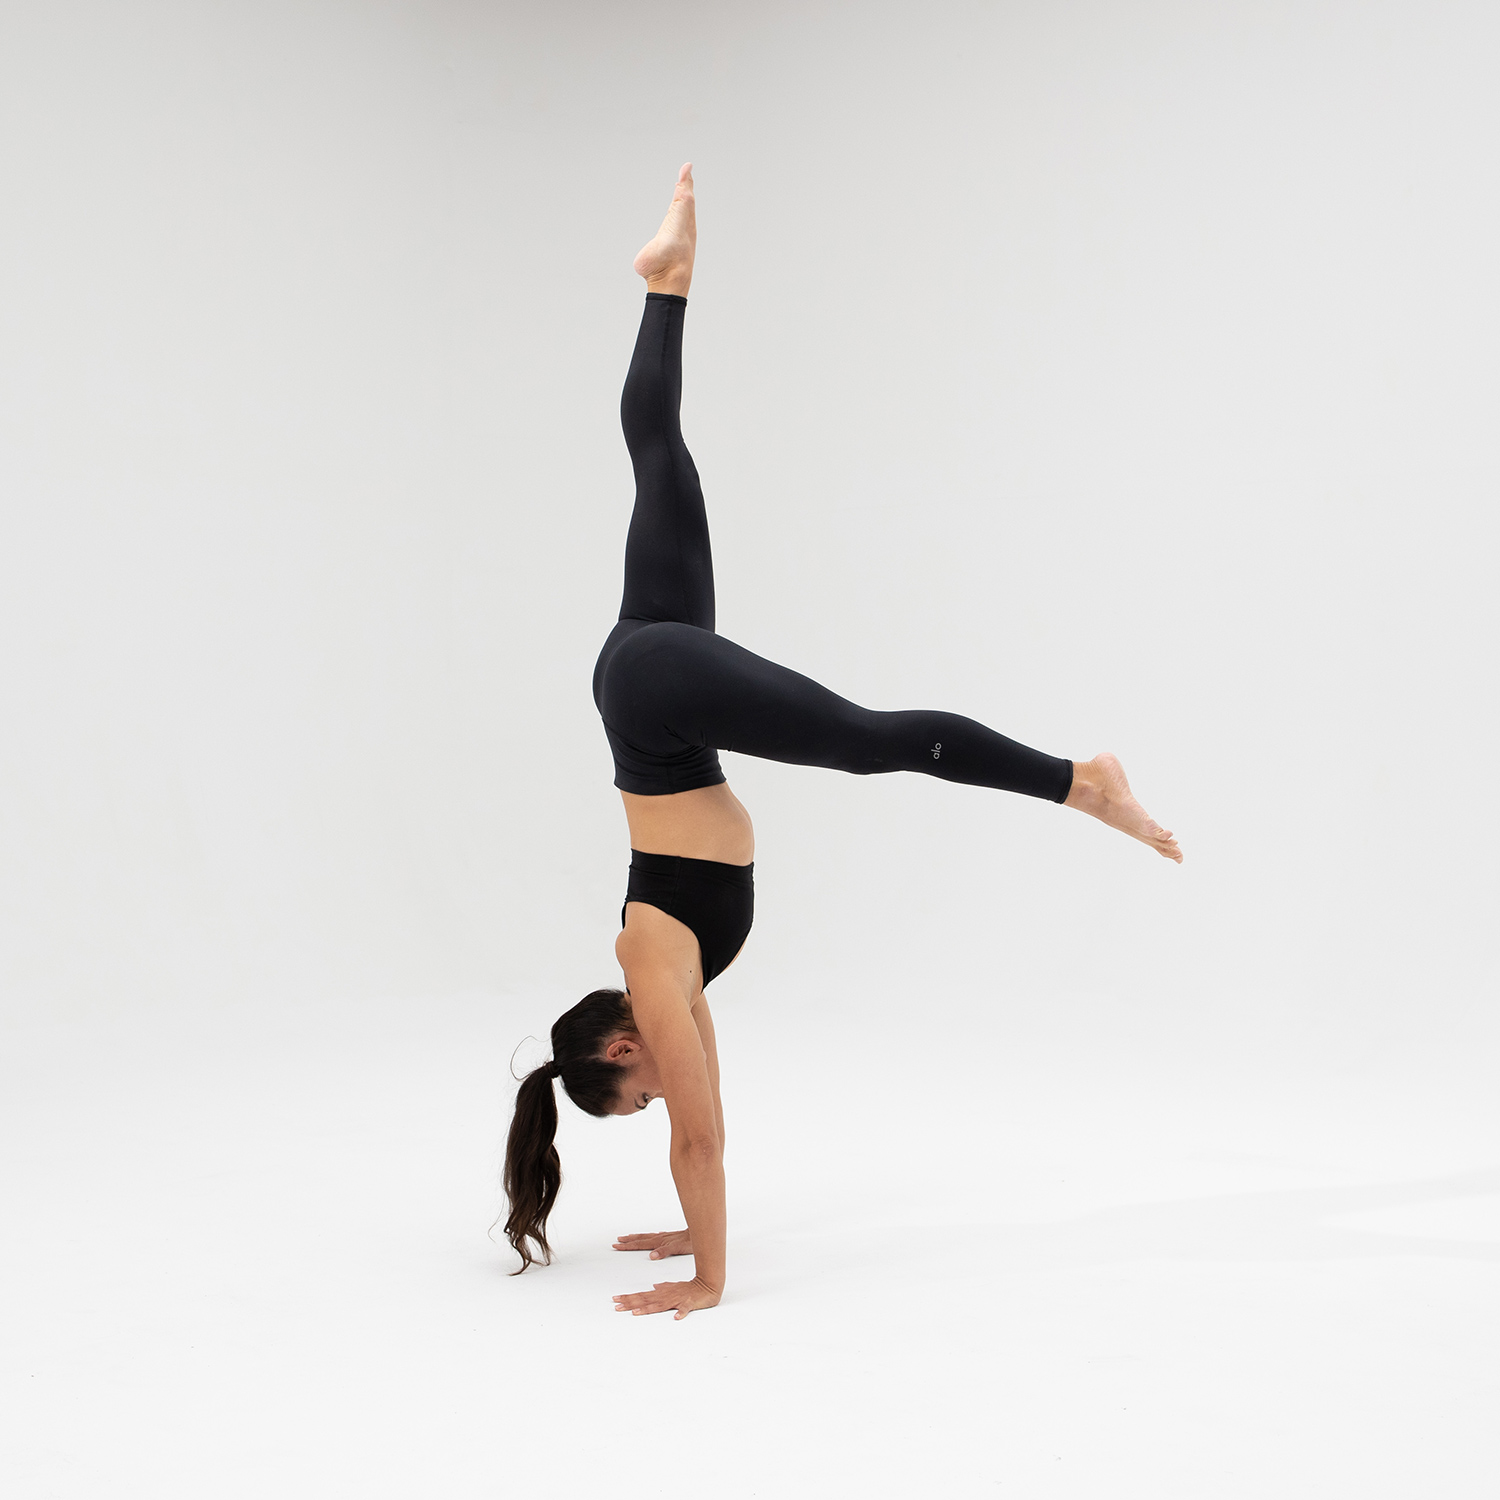 Yoga Modifications for the Standing Forward Bend - Yoga Destiny